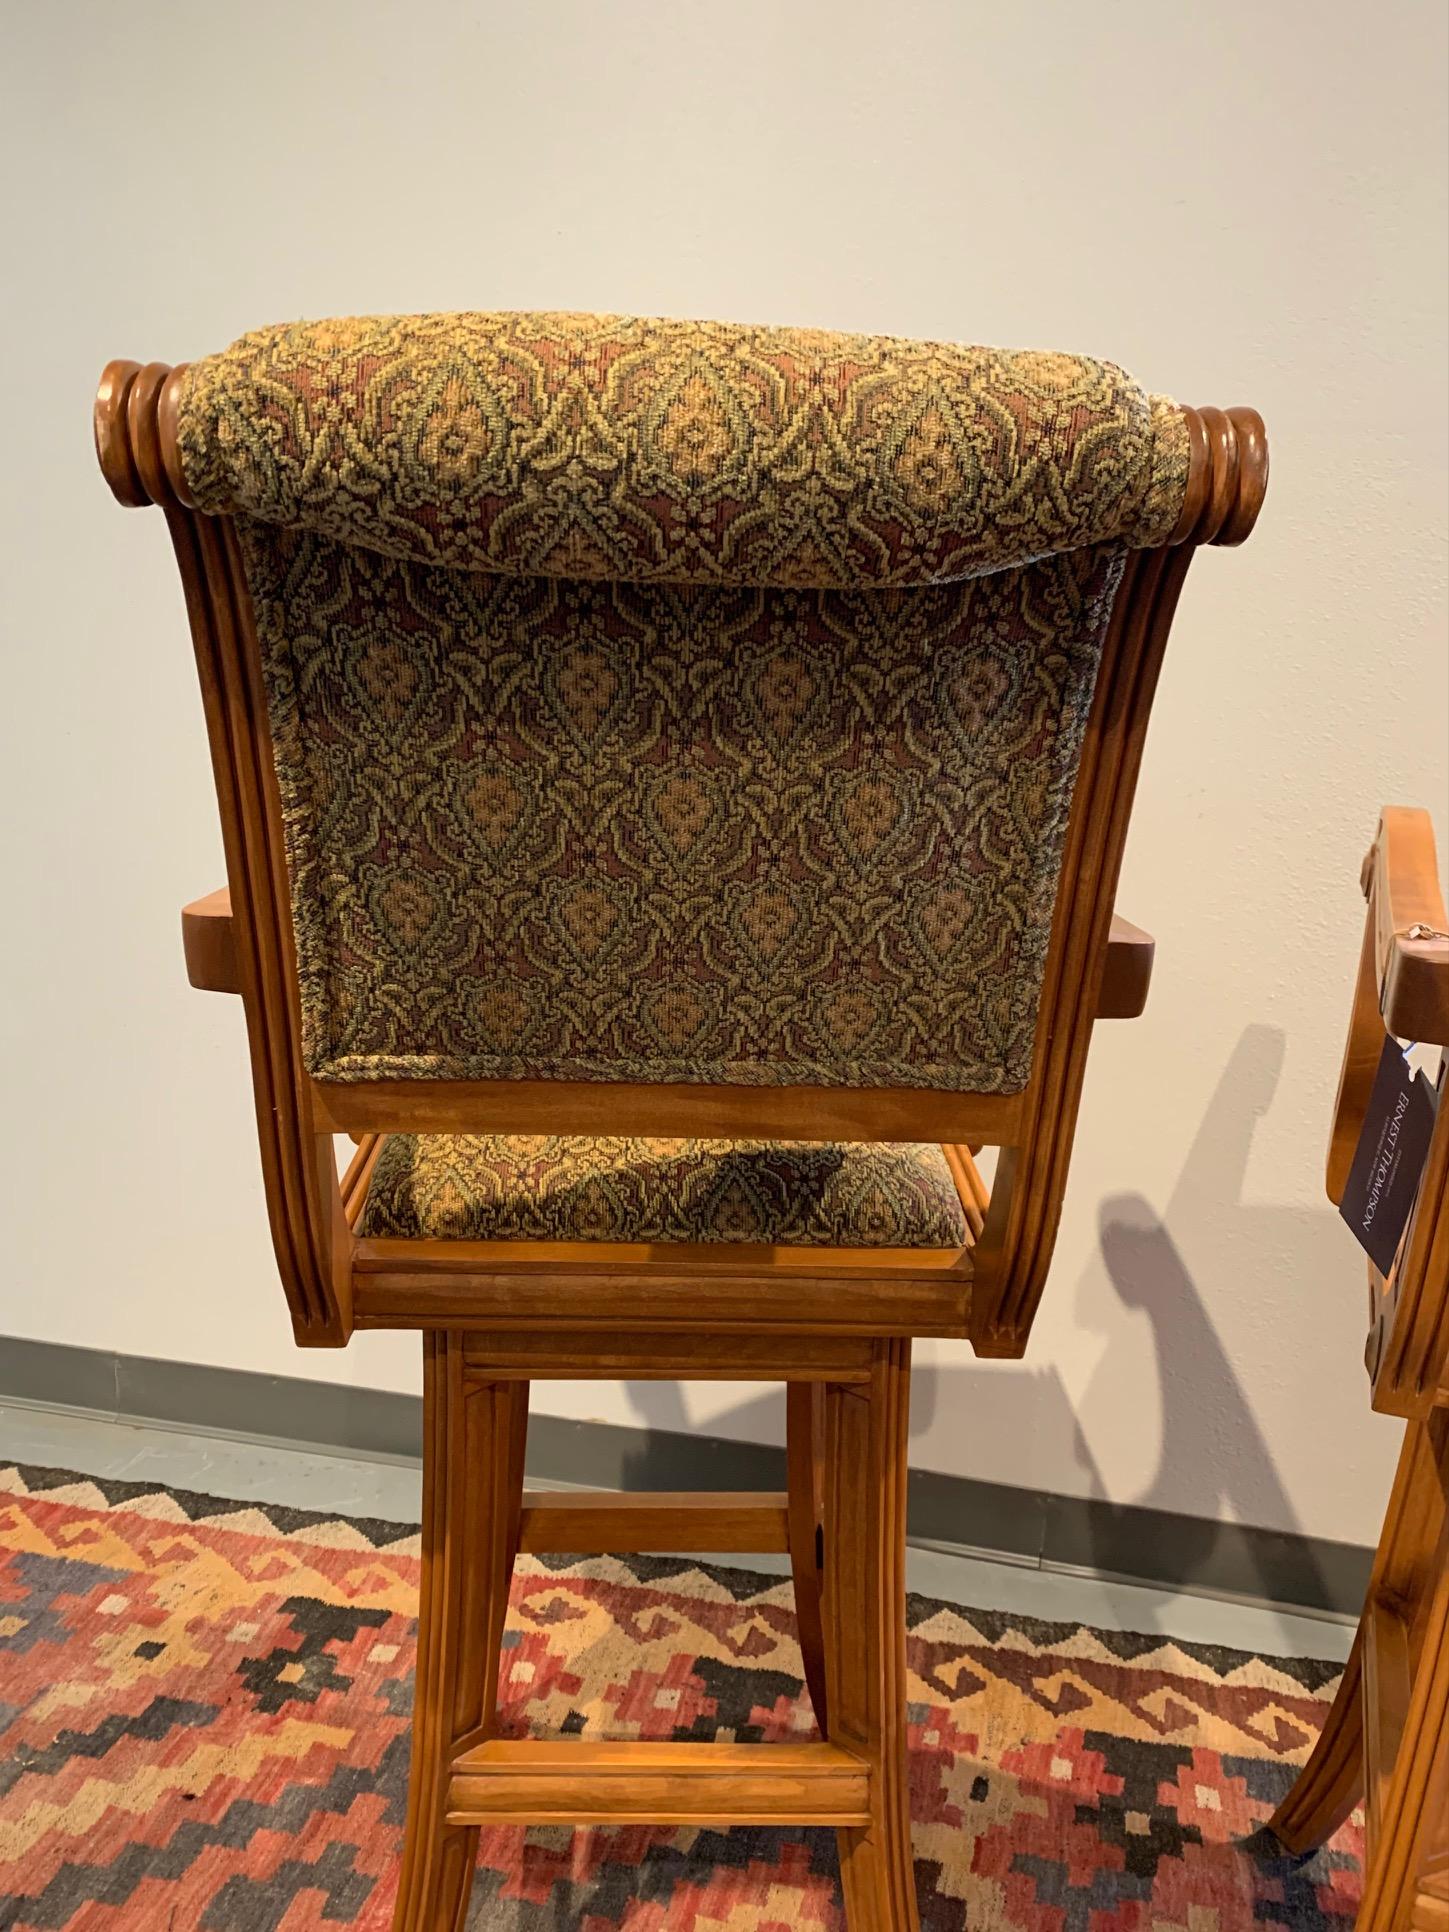 The Contessa Swivel Barstool is a classic in the Ernest Thompson line of furniture. 
Hand carved details and beautifully upholstered. These are showroom pieces that show some use. Fabric is in perfect condition. Extremely comfortable with full